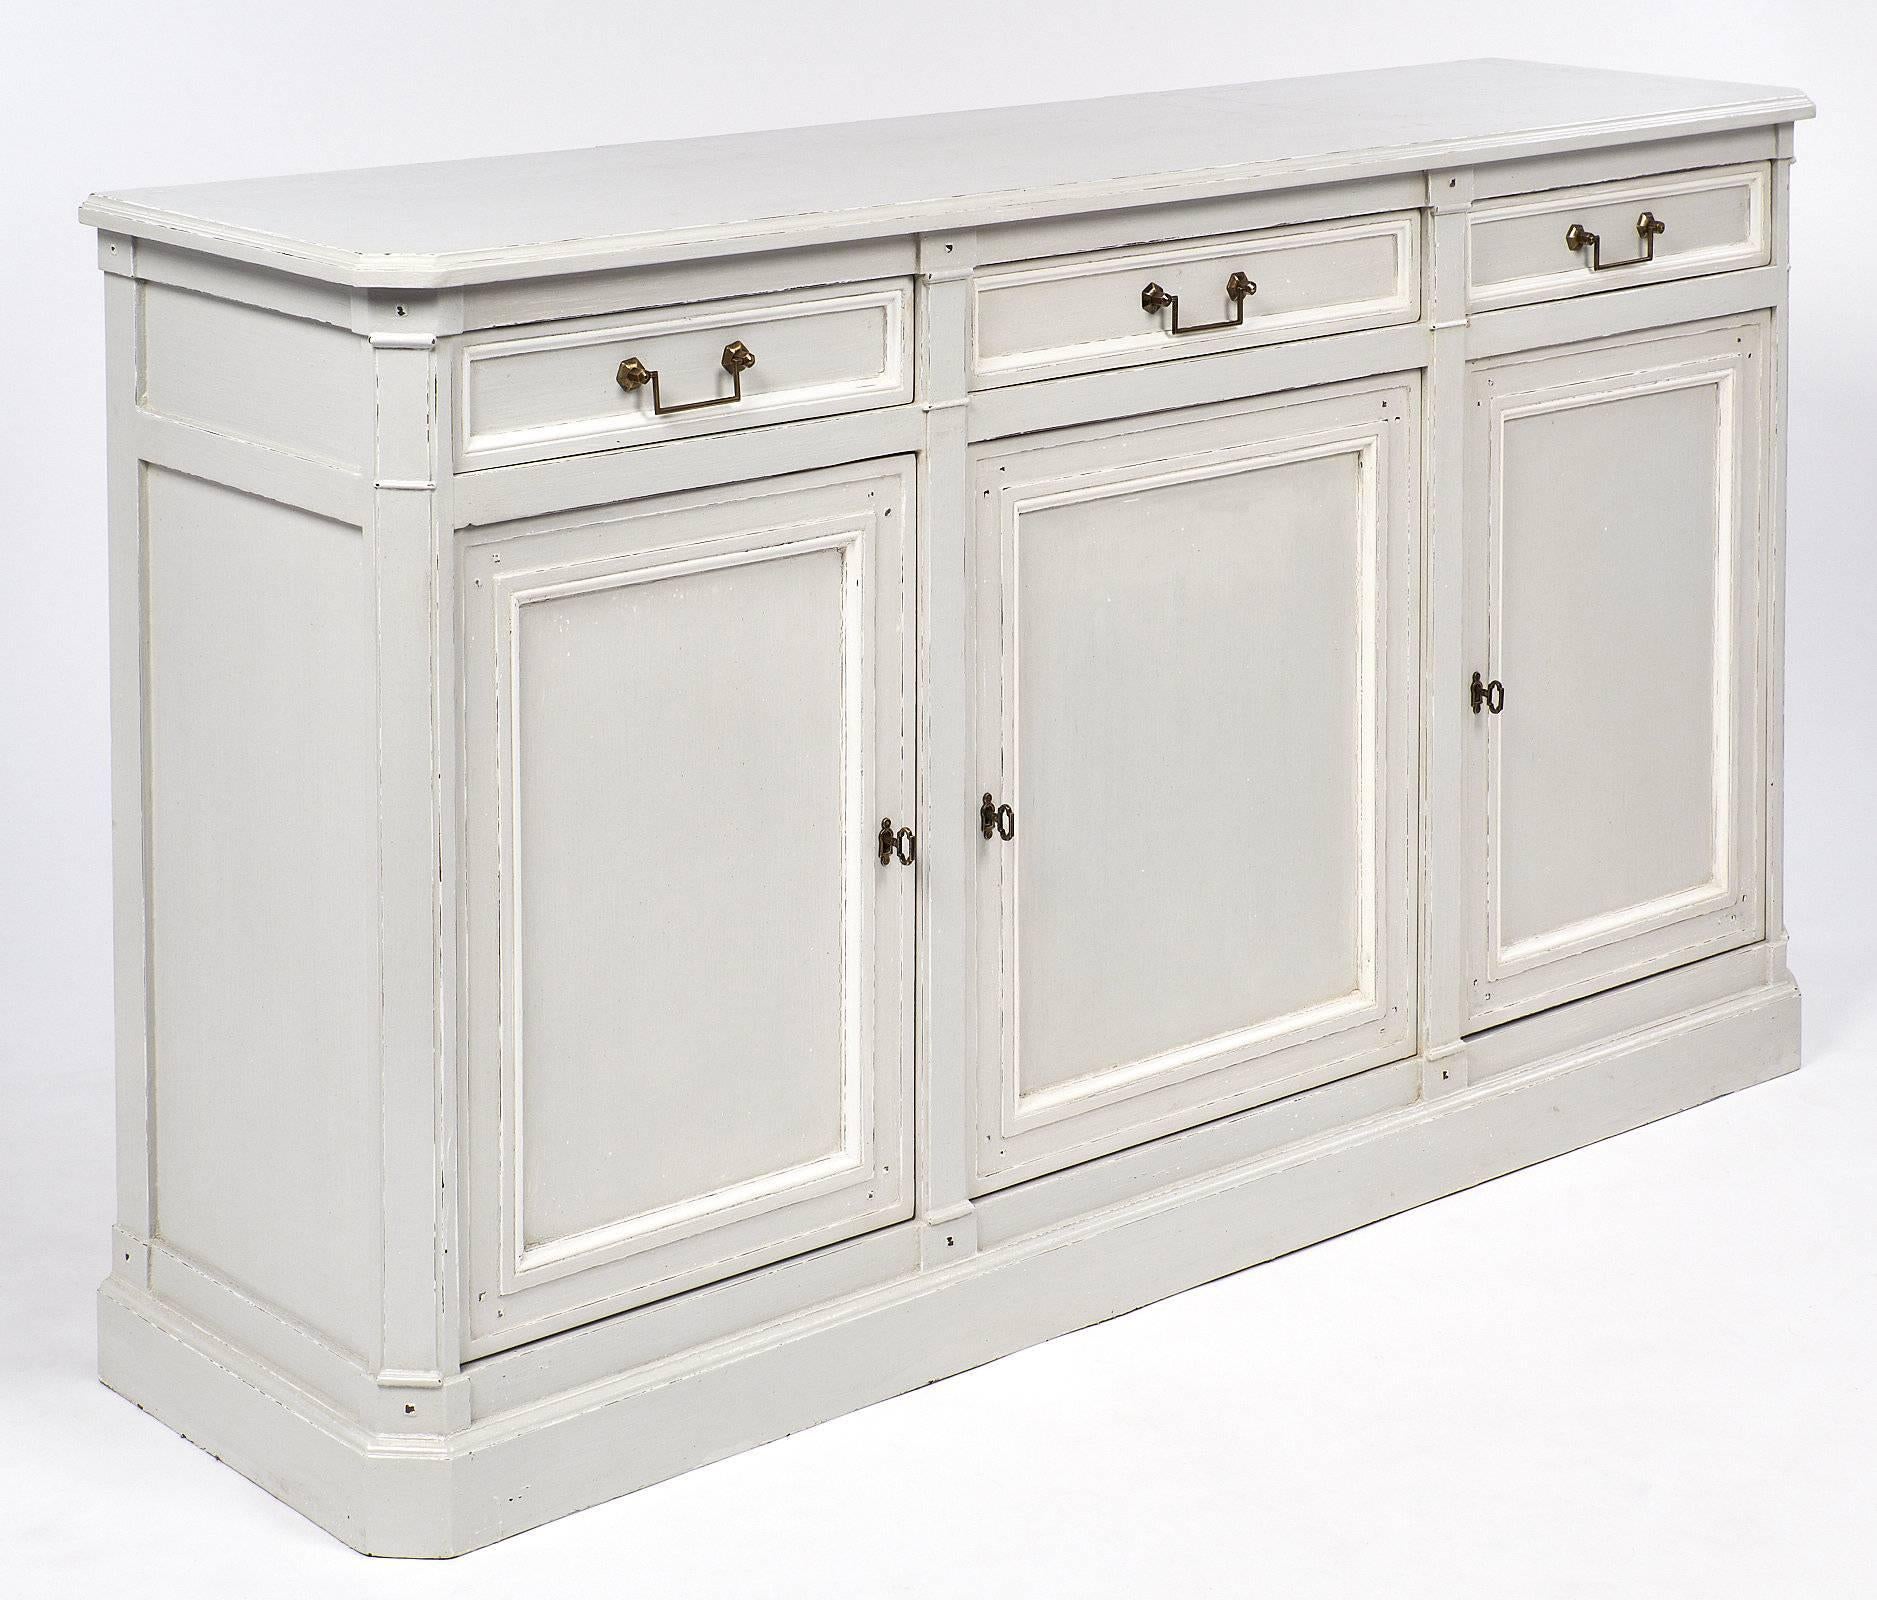 Wonderful buffet in the Louis Philippe style with three doors and three drawers. This piece has been painted with a grey Trianon color and features white trim and details. The piece has solid brass handles and the original locks and keys. This